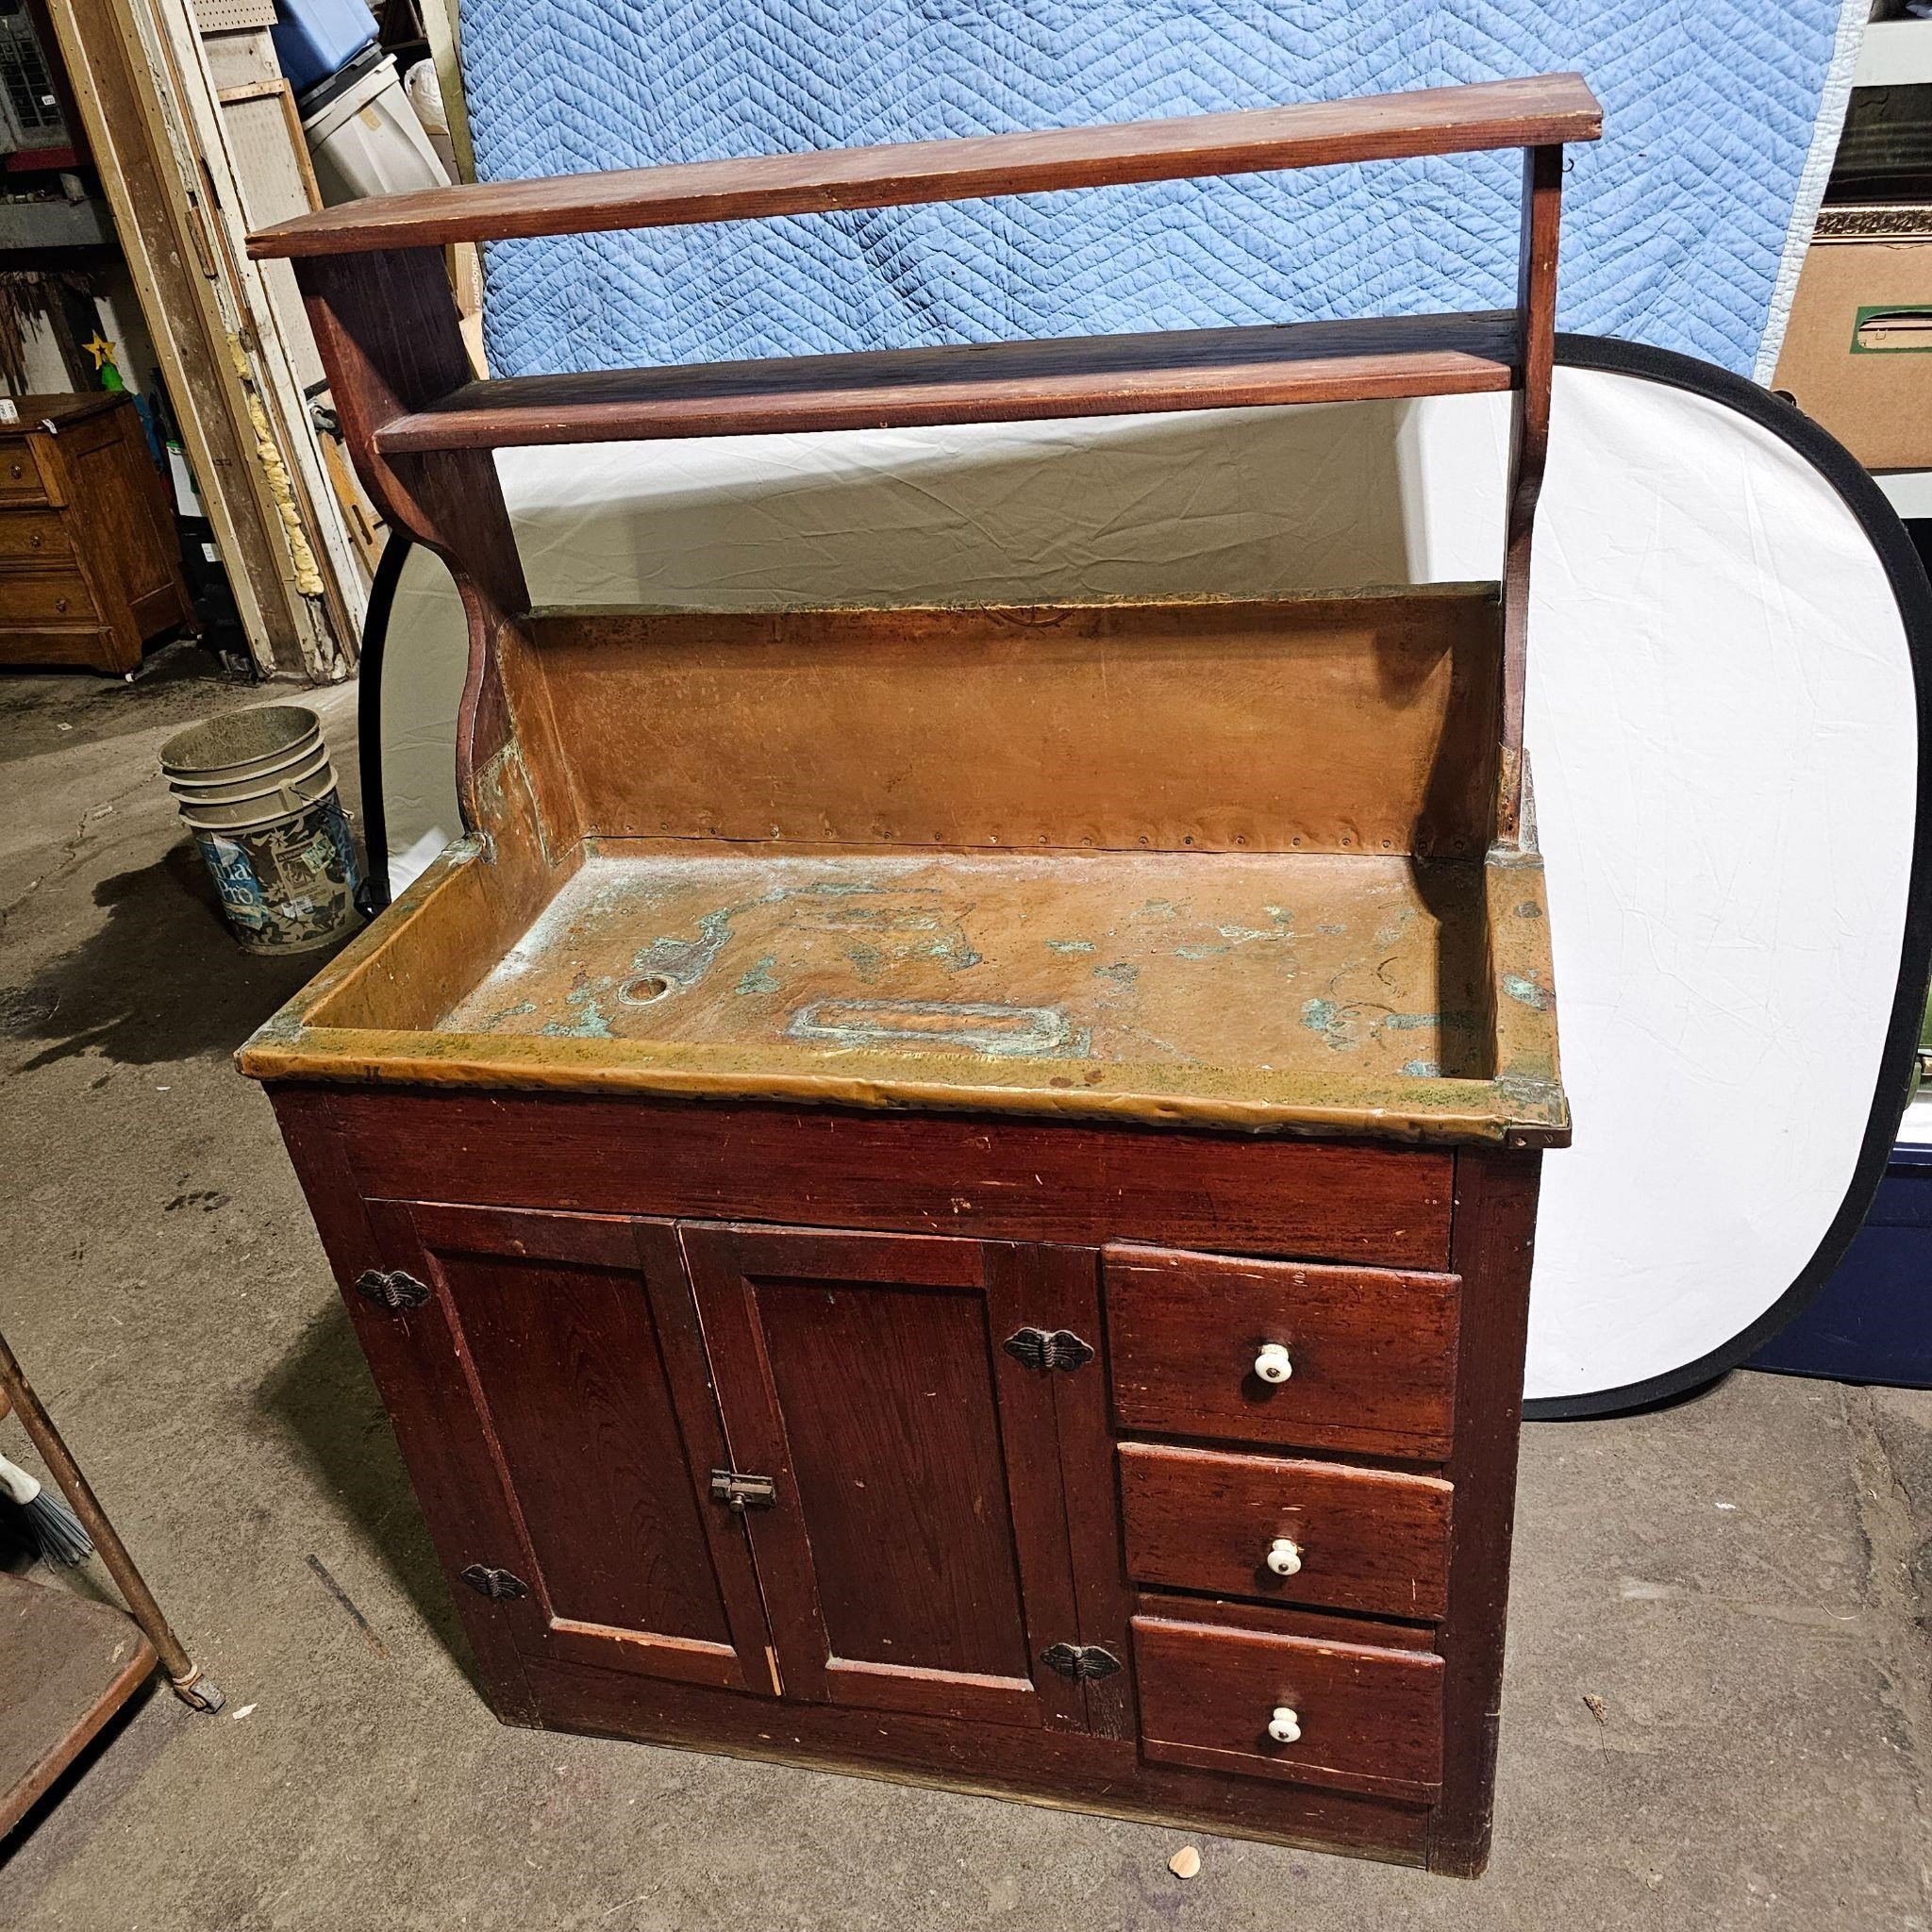 Early 1900s pine copper lined dry sink